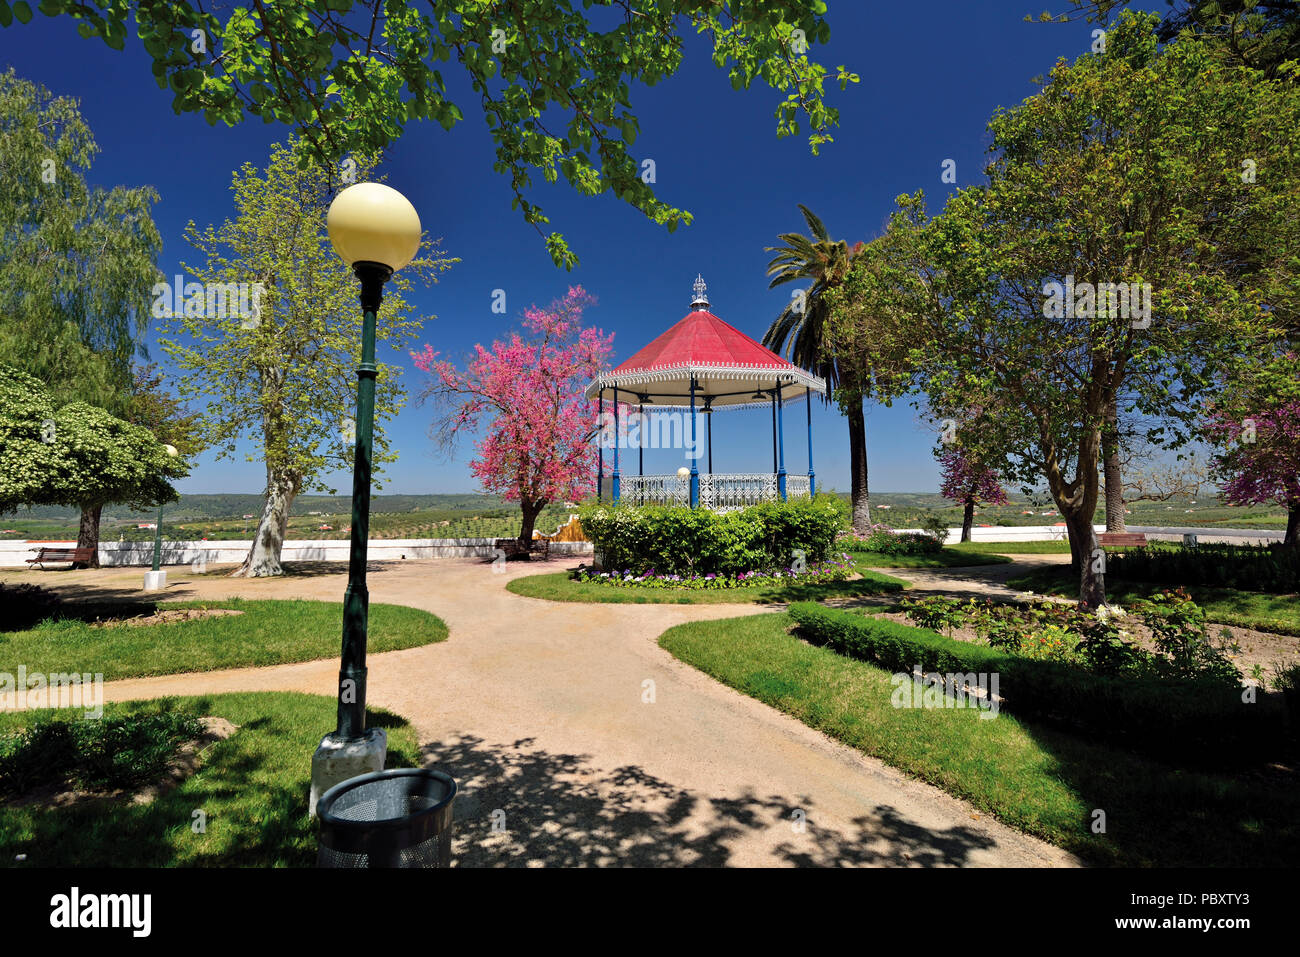 Romantic city park with green areas, trees and music pavilion Stock Photo